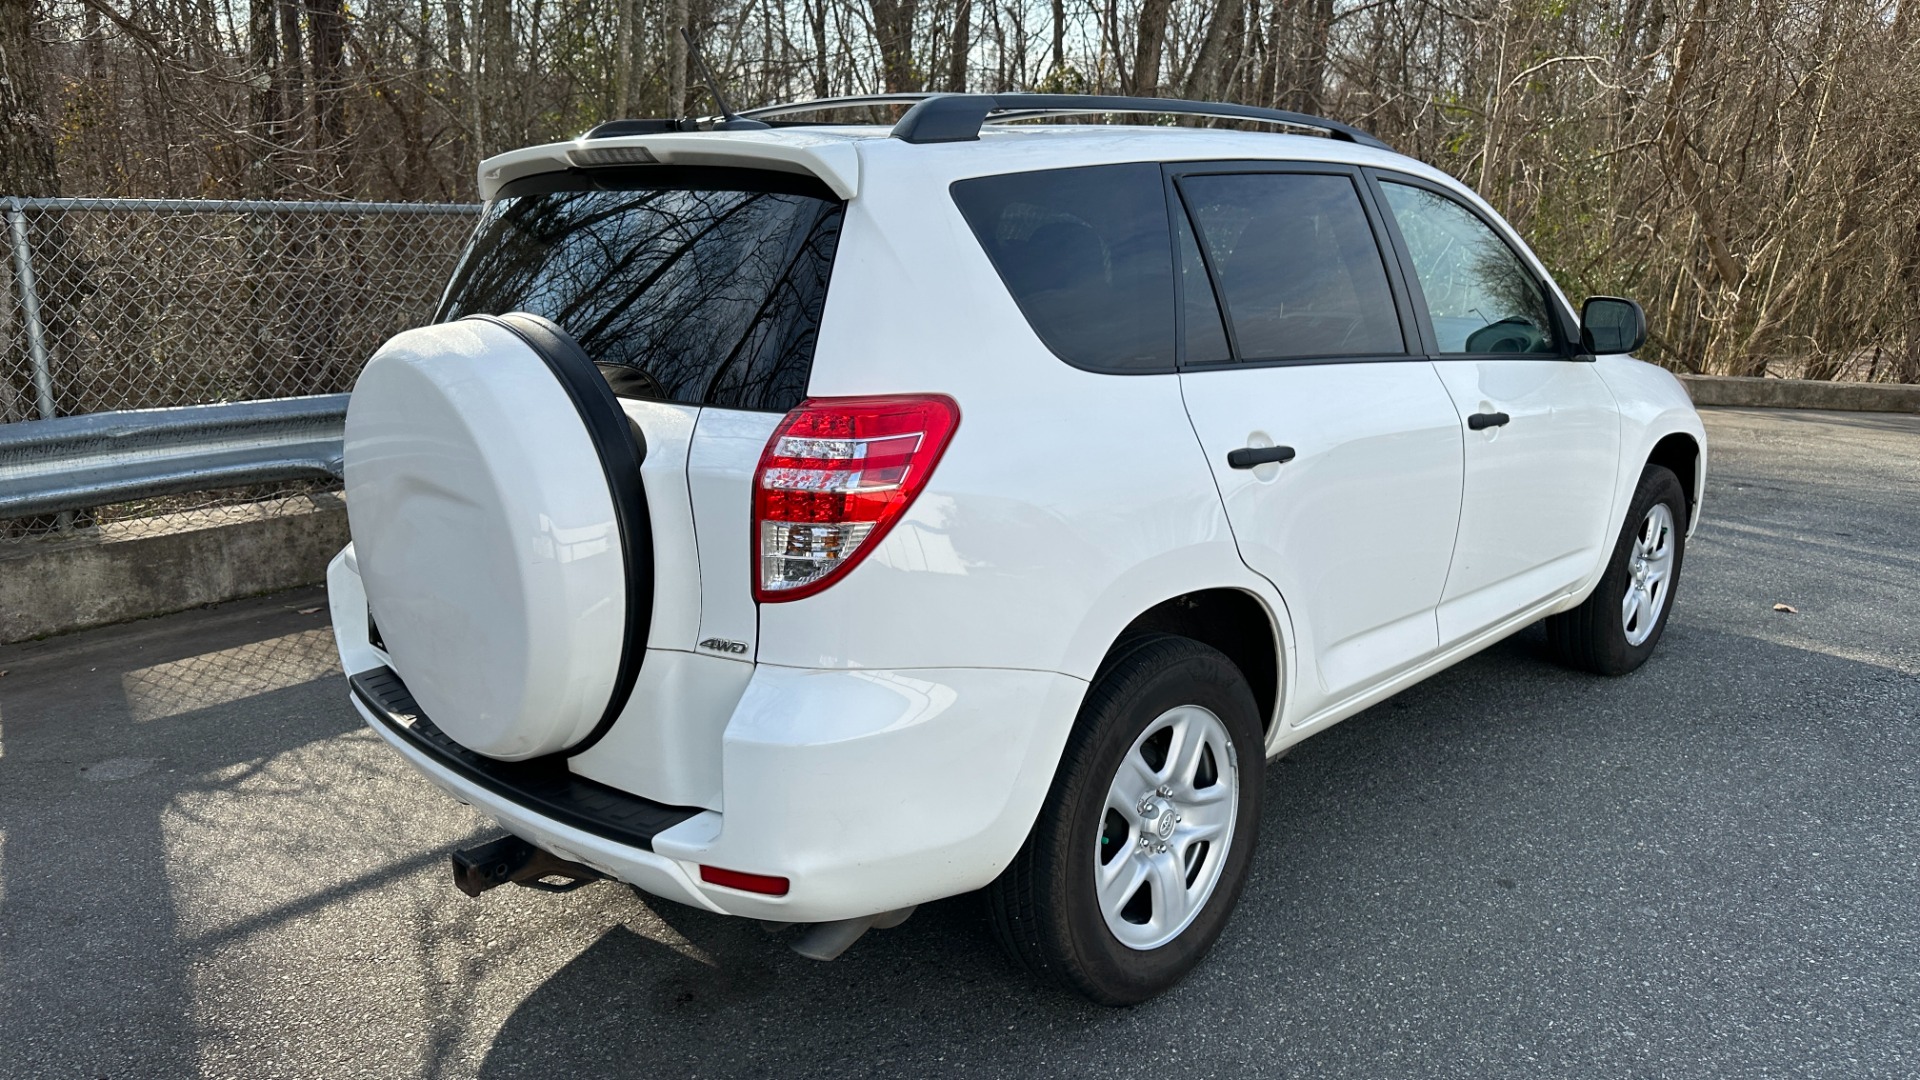 Used 2012 Toyota RAV4 4X4 / VALUE PACKAGE / ROOF RACK / TOW PACKAGE / DAYTIME RUNNING LIGHTS for sale Sold at Formula Imports in Charlotte NC 28227 4